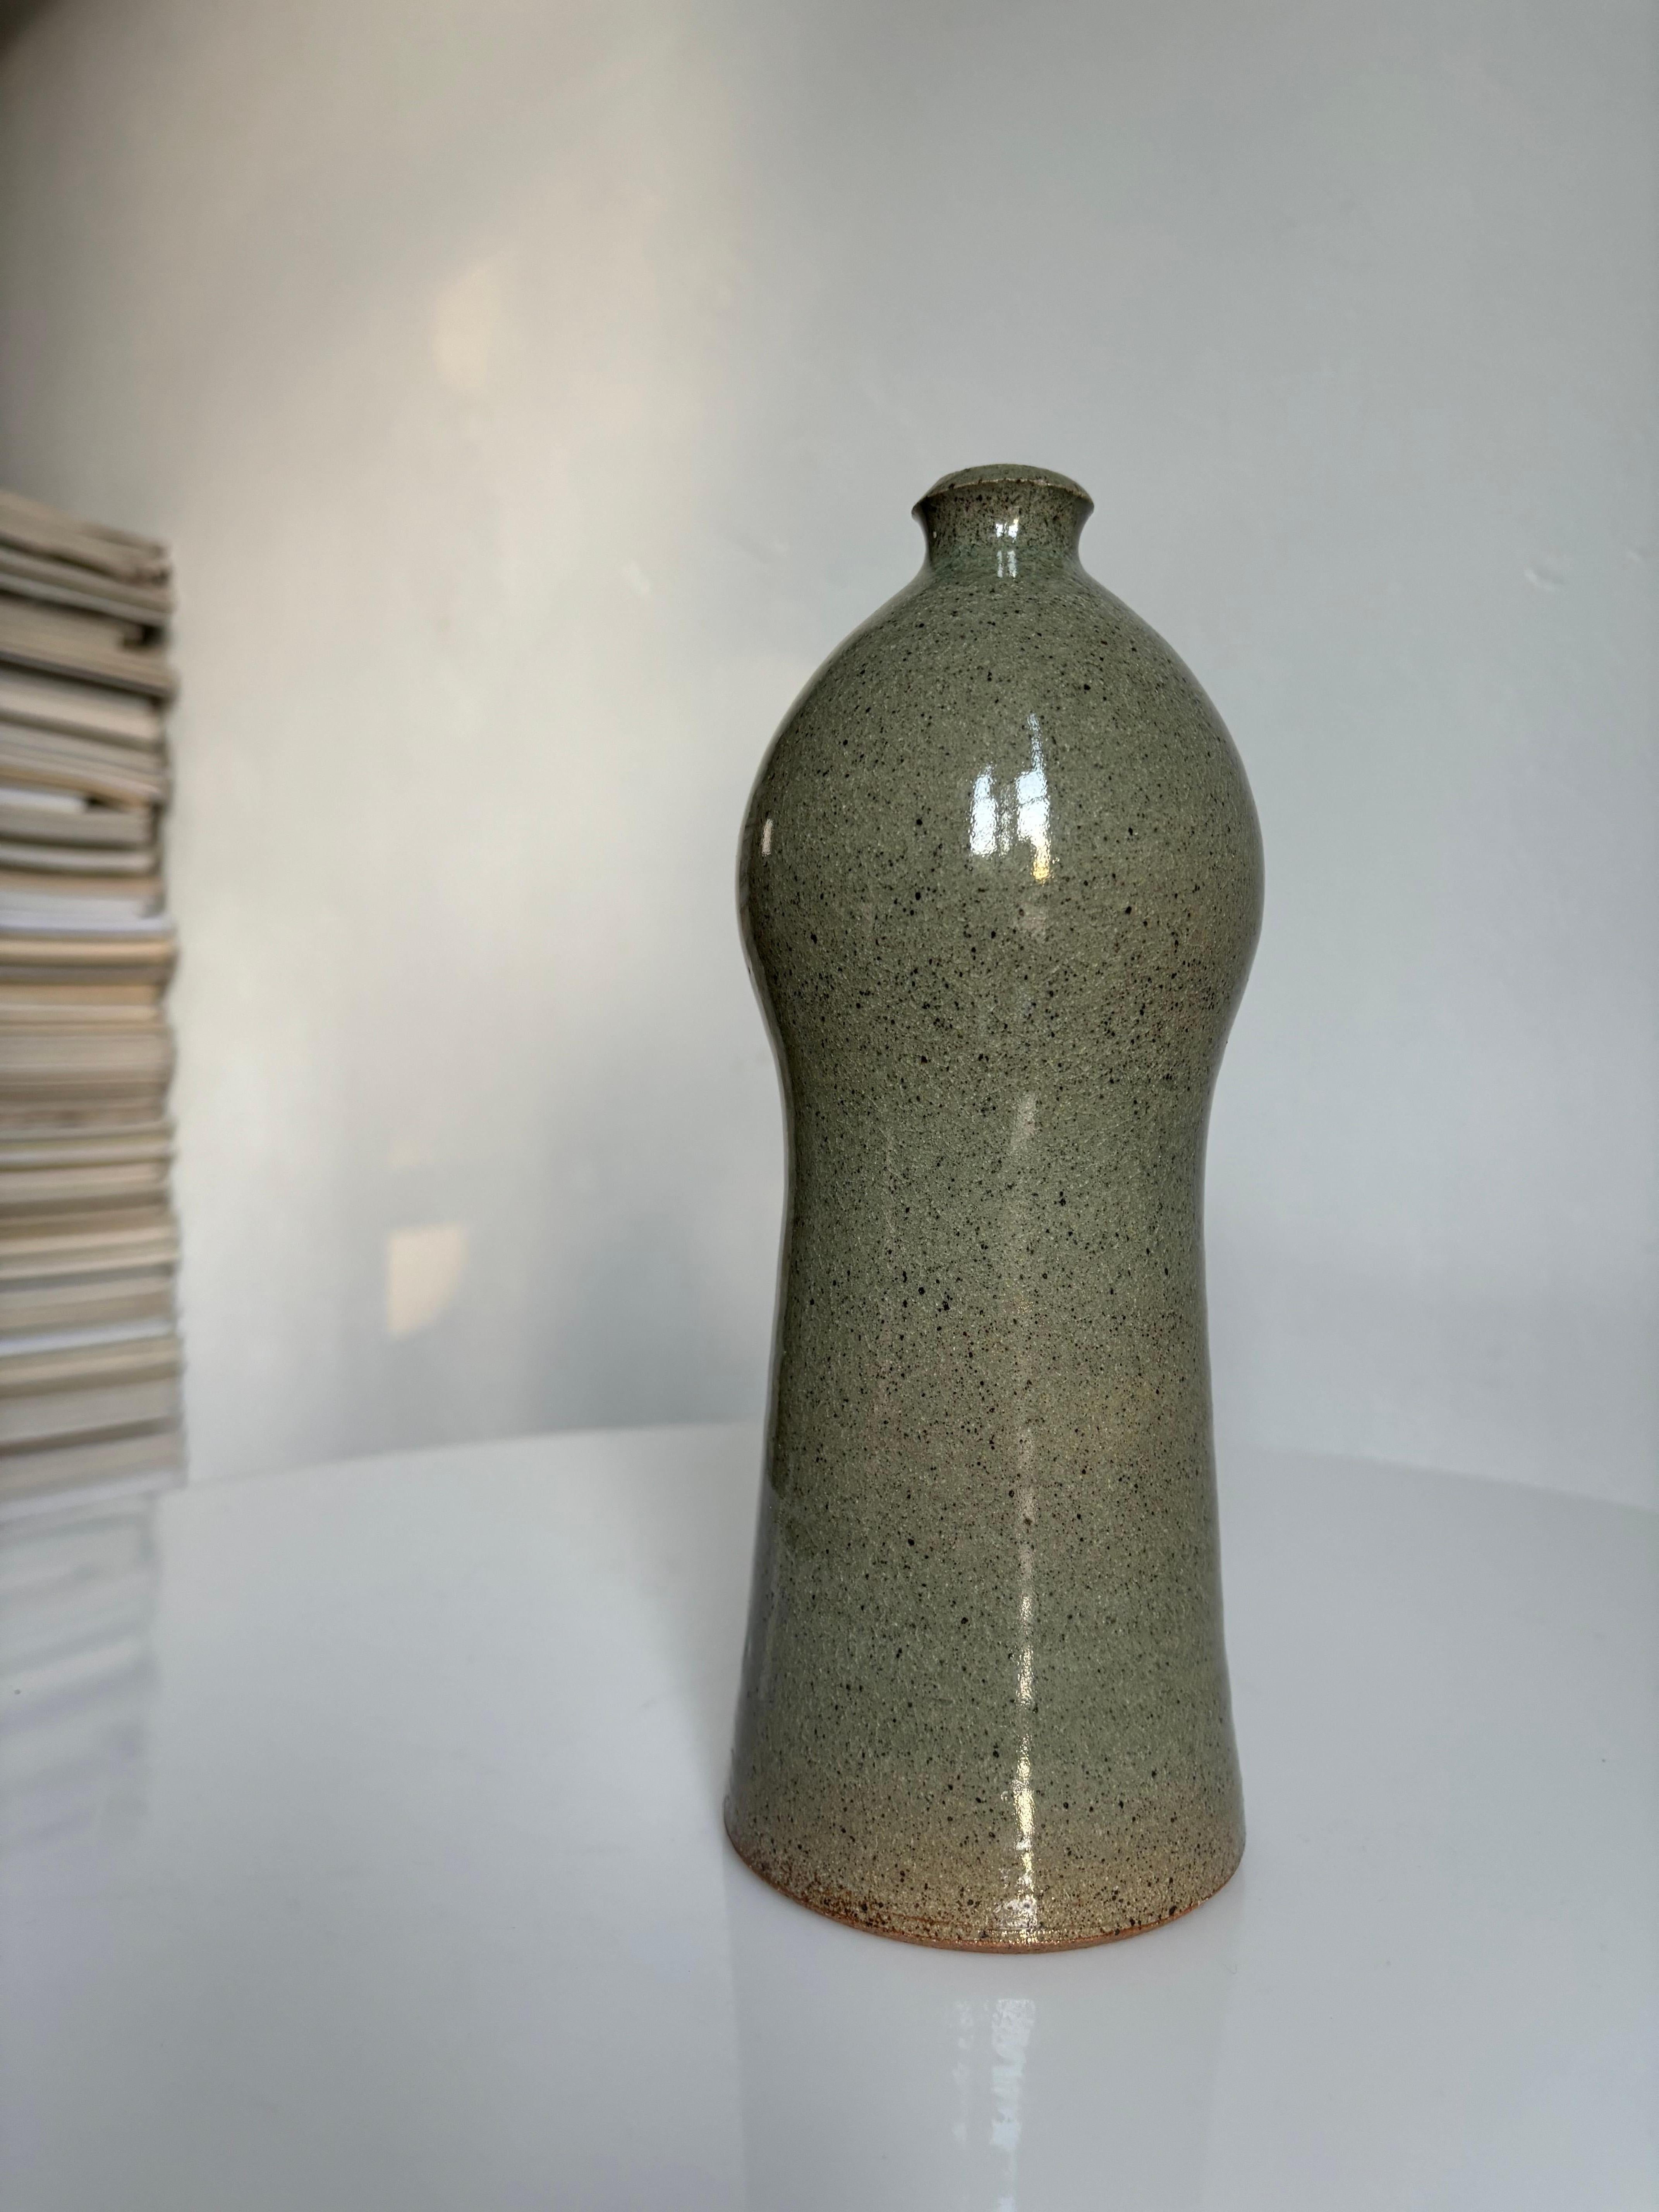 Curvy and slender handmade ceramic vase with narrow opening. By designer Ole Bøgild for Lee Keramik in the 1970s. Glazed with a beautifully speckled sage green shiny glaze. Signed under base. Beautiful vintage condition. 
Denmark, 1970s. 